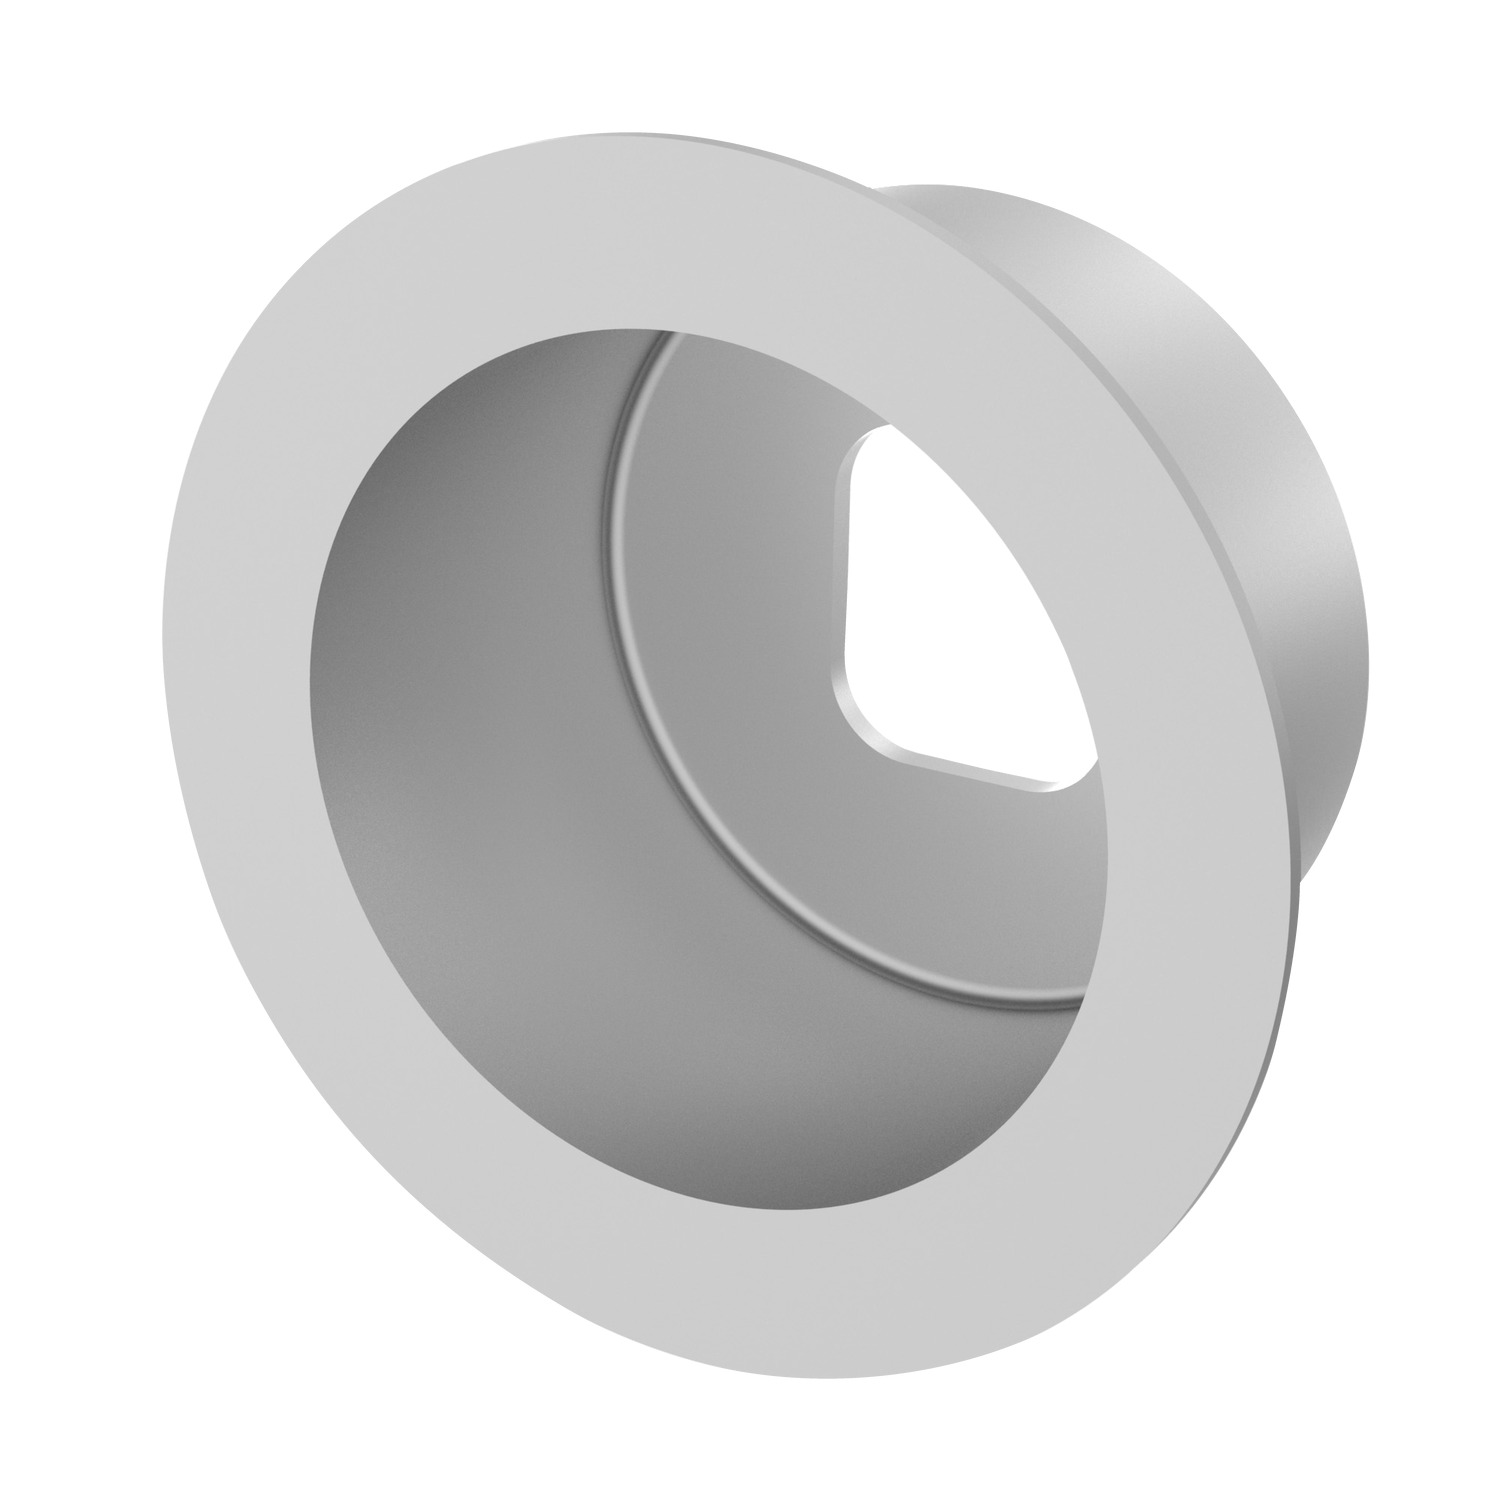 A0420.AW0022 Recessed Spacer for isolation panels & covers